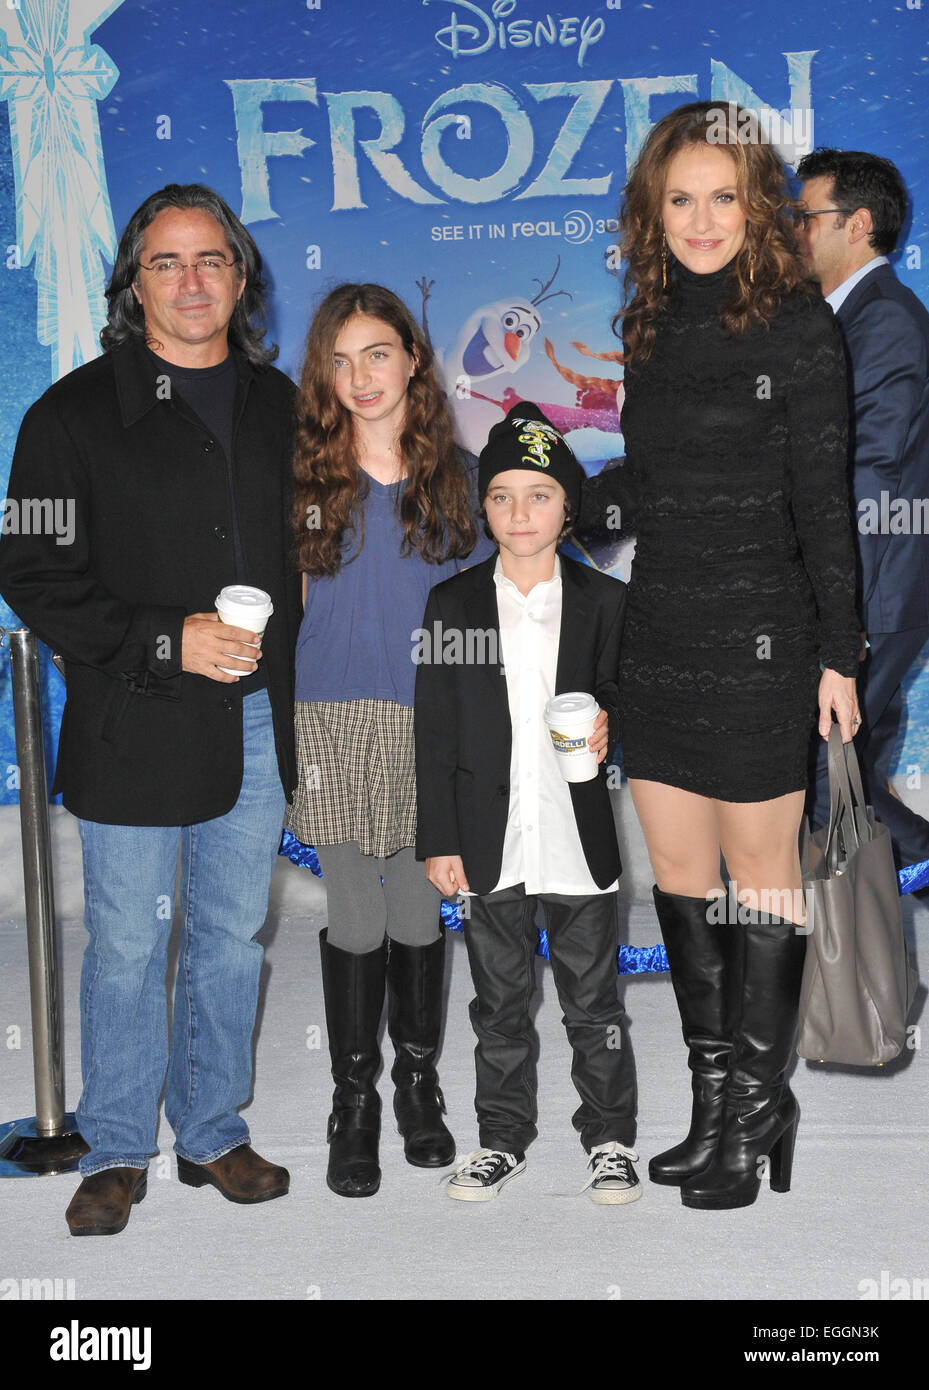 LOS ANGELES, CA - NOVEMBER 19, 2013: Amy Brenneman & husband Brad Silberling & children at the premiere of Disney's 'Frozen' at the El Capitan Theatre, Hollywood. Stock Photo